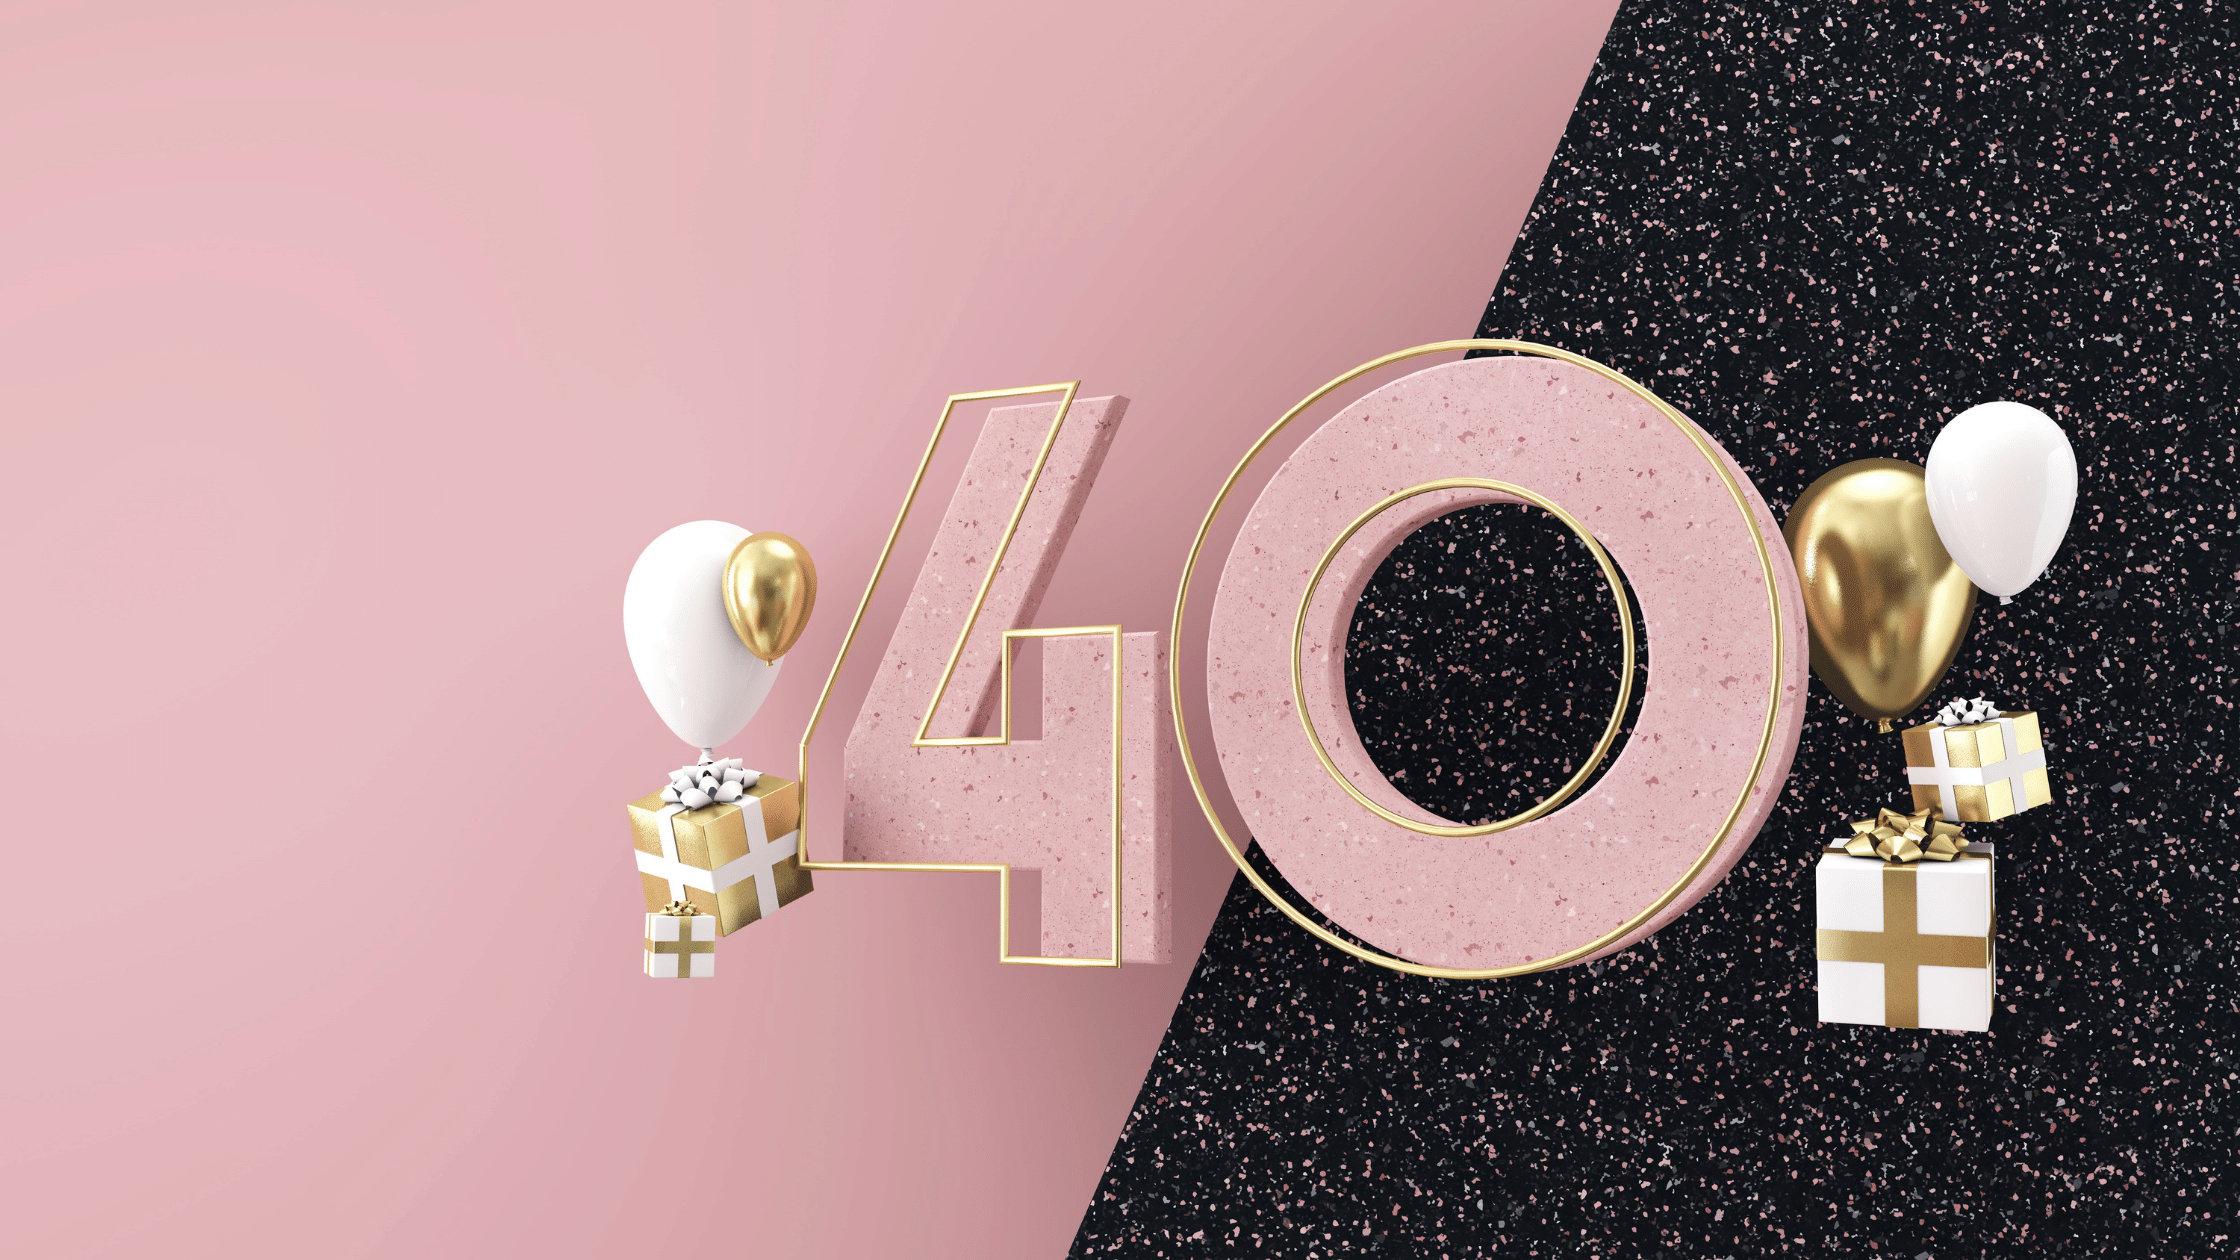 10 life lessons to learn before turning 40